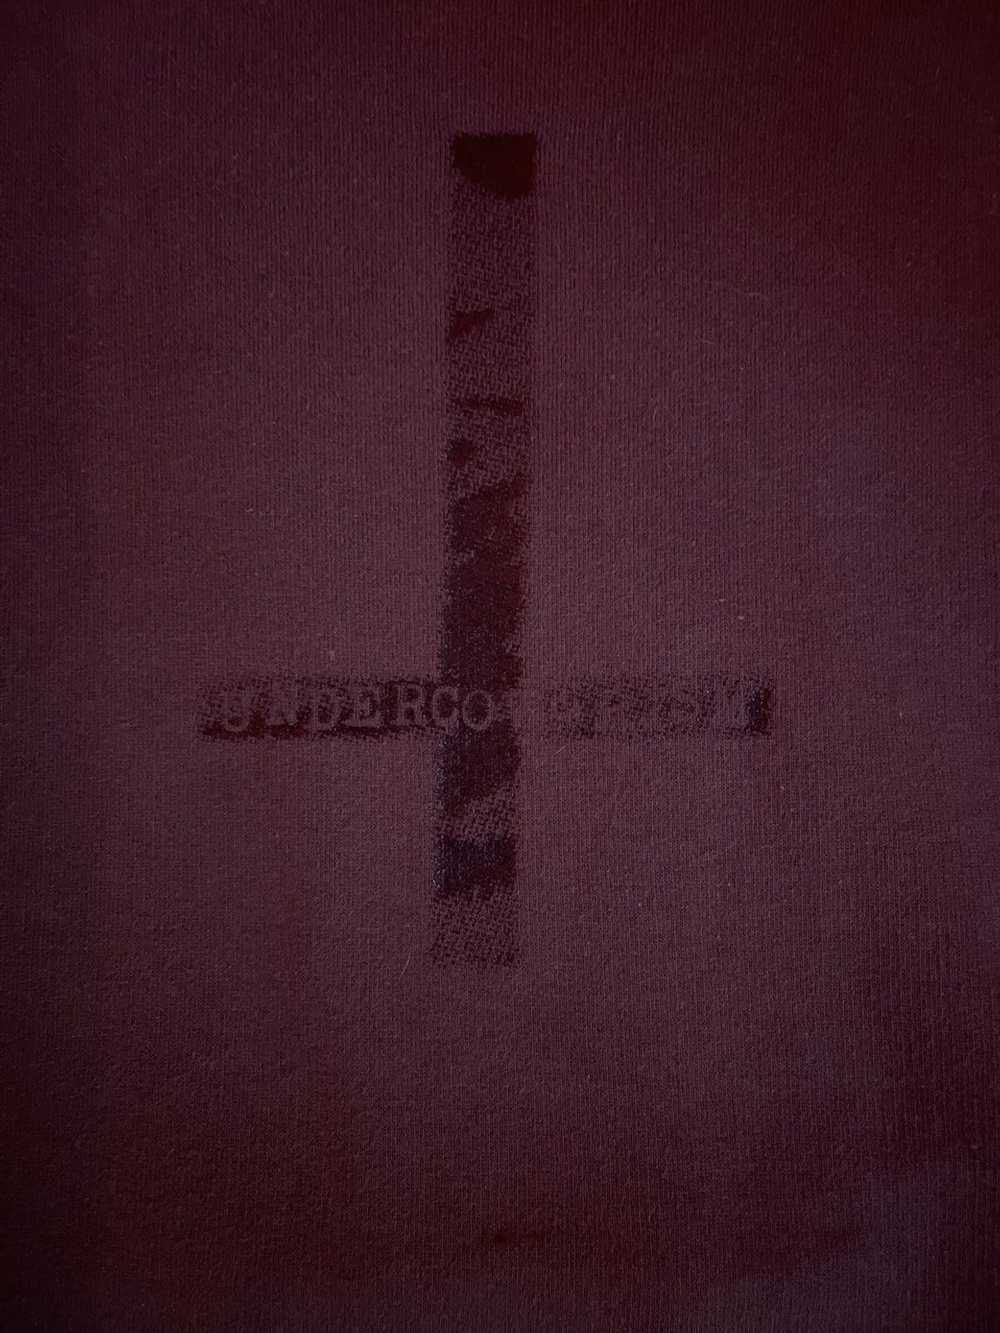 Undercover Undercover aw02 Velcro cross sweater - image 2